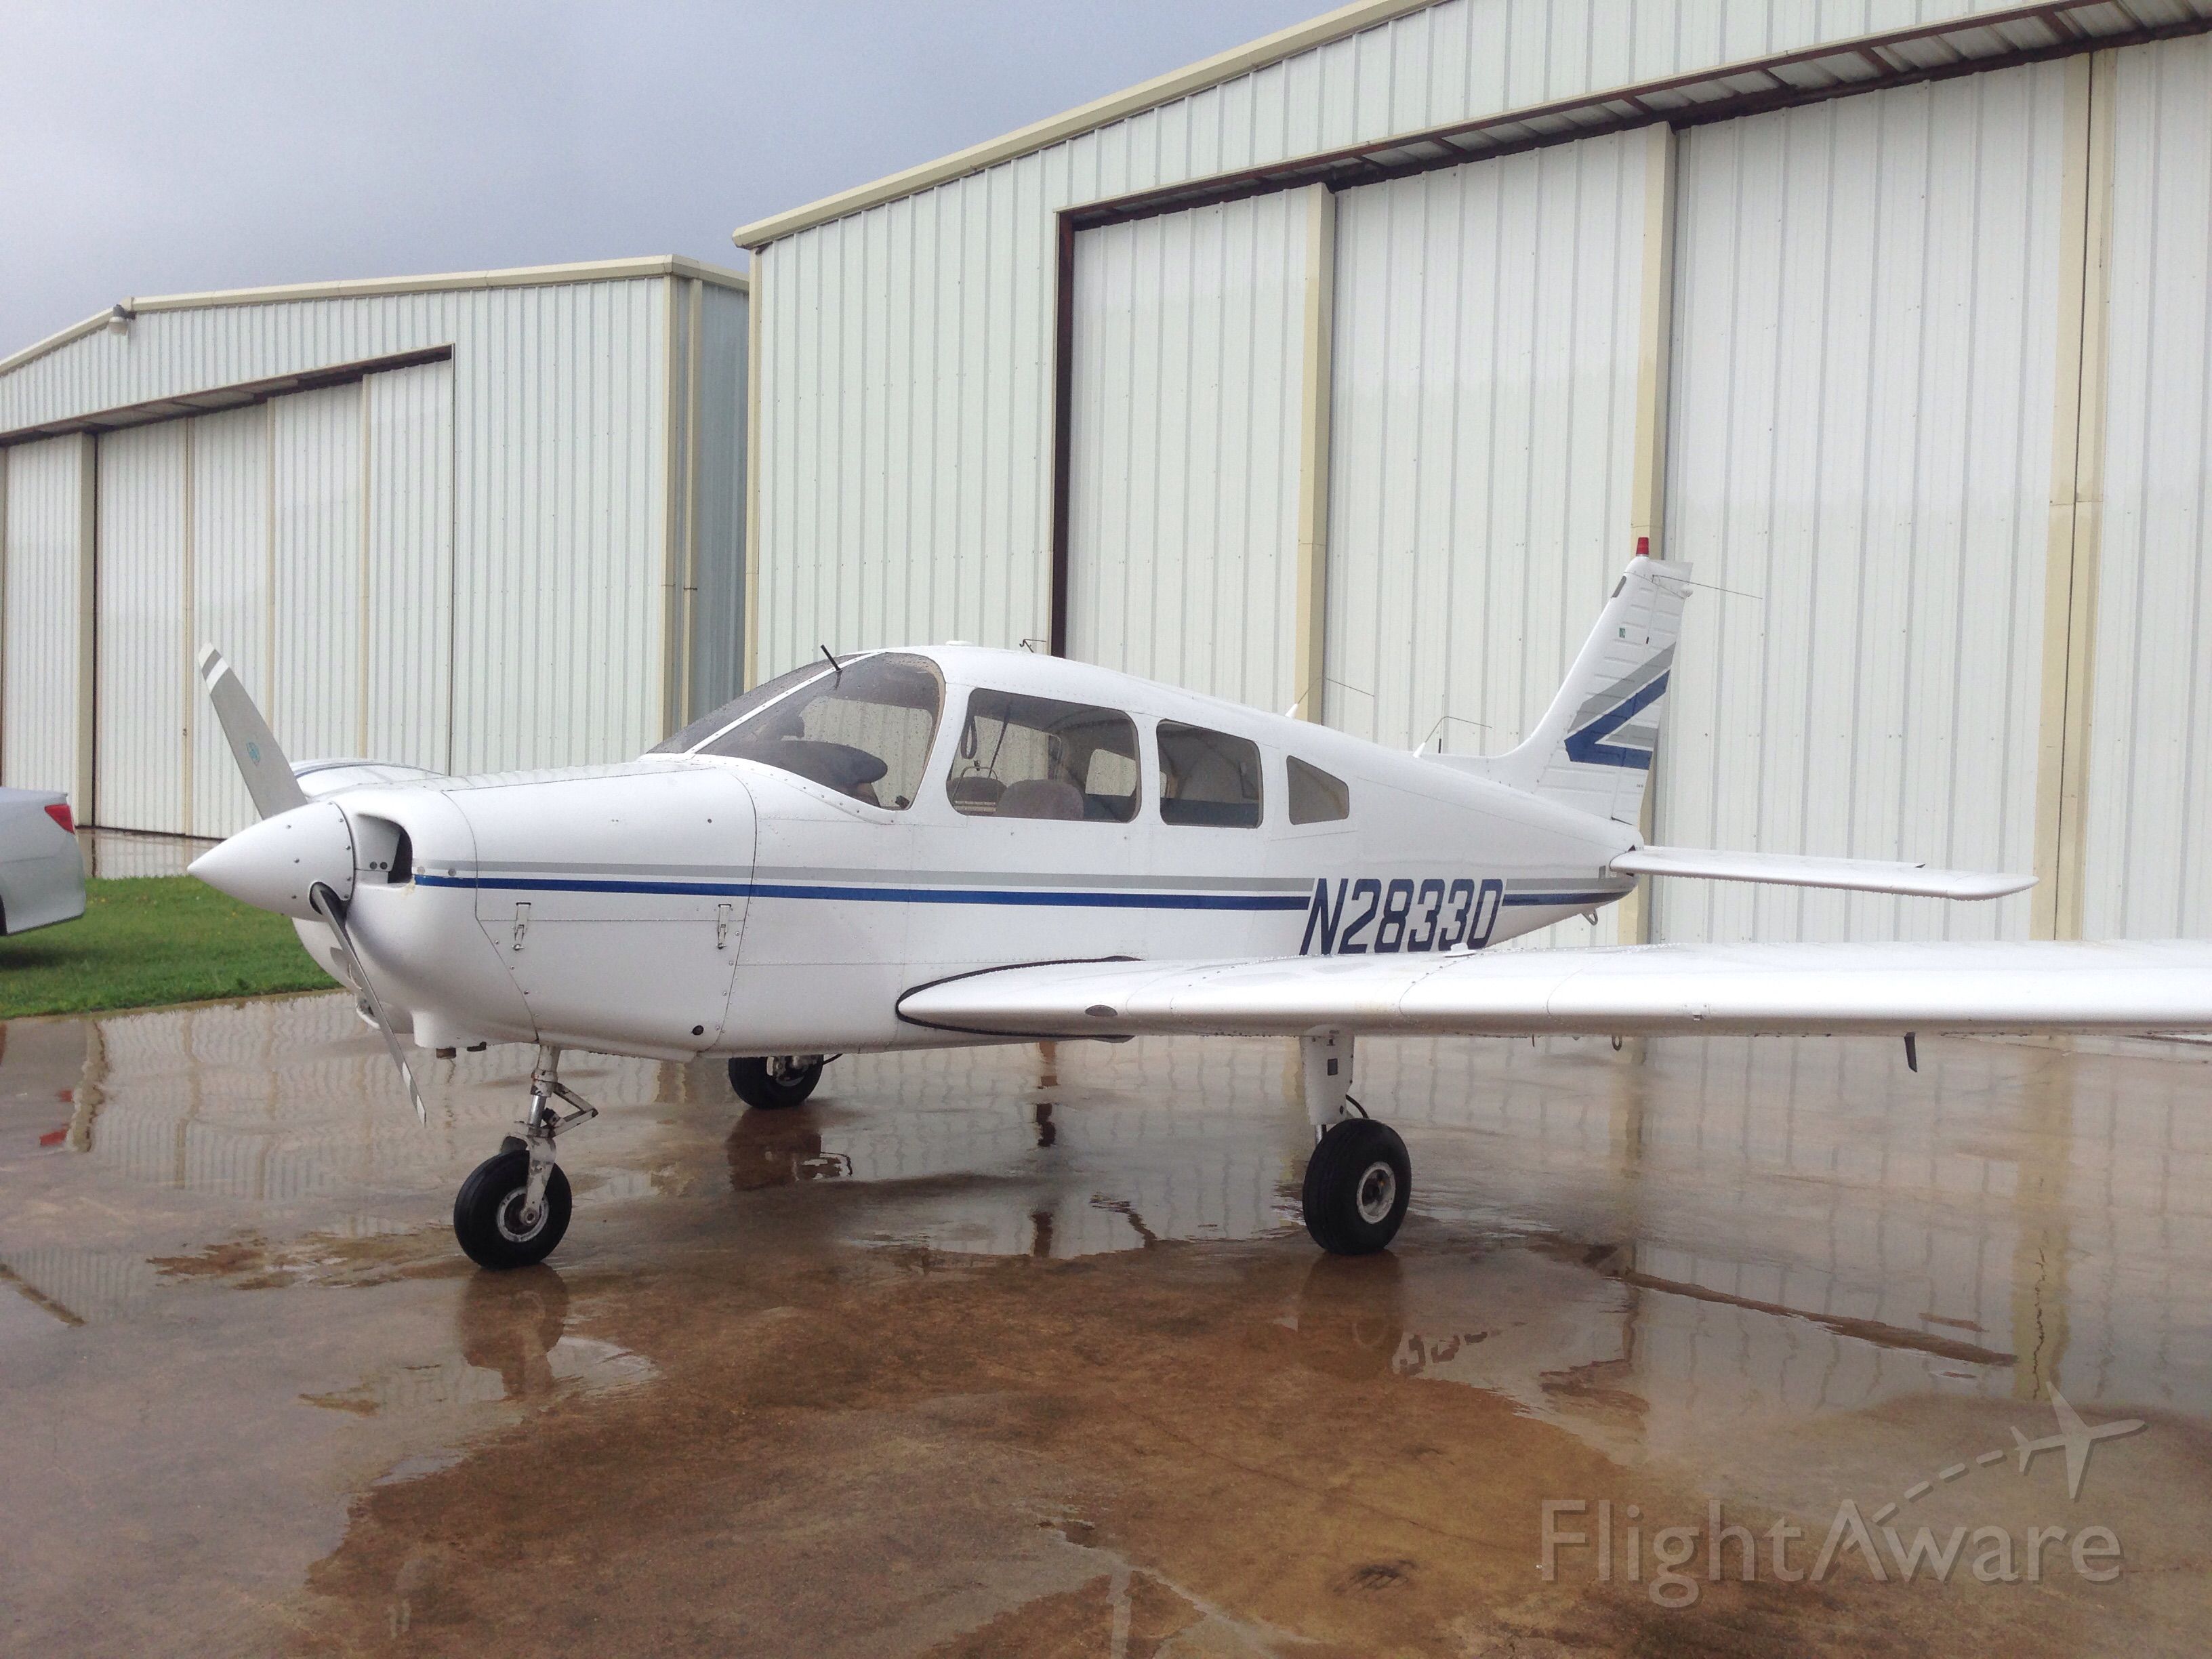 Piper Cherokee (N2833D) - Taken with an iPhone 5